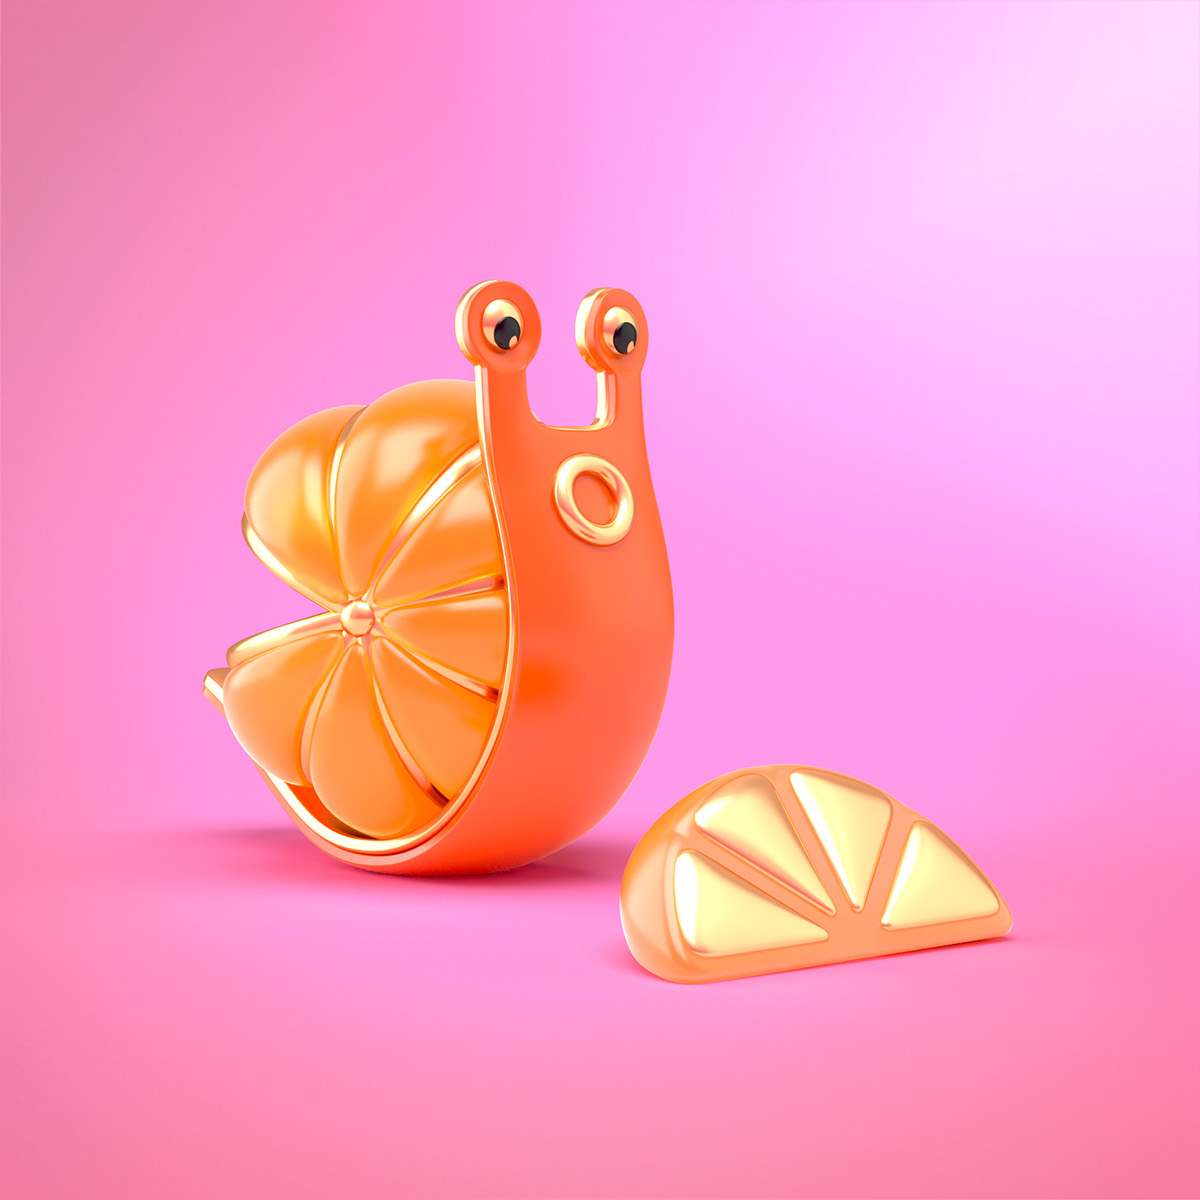 3 snail 3d models by nikopicto